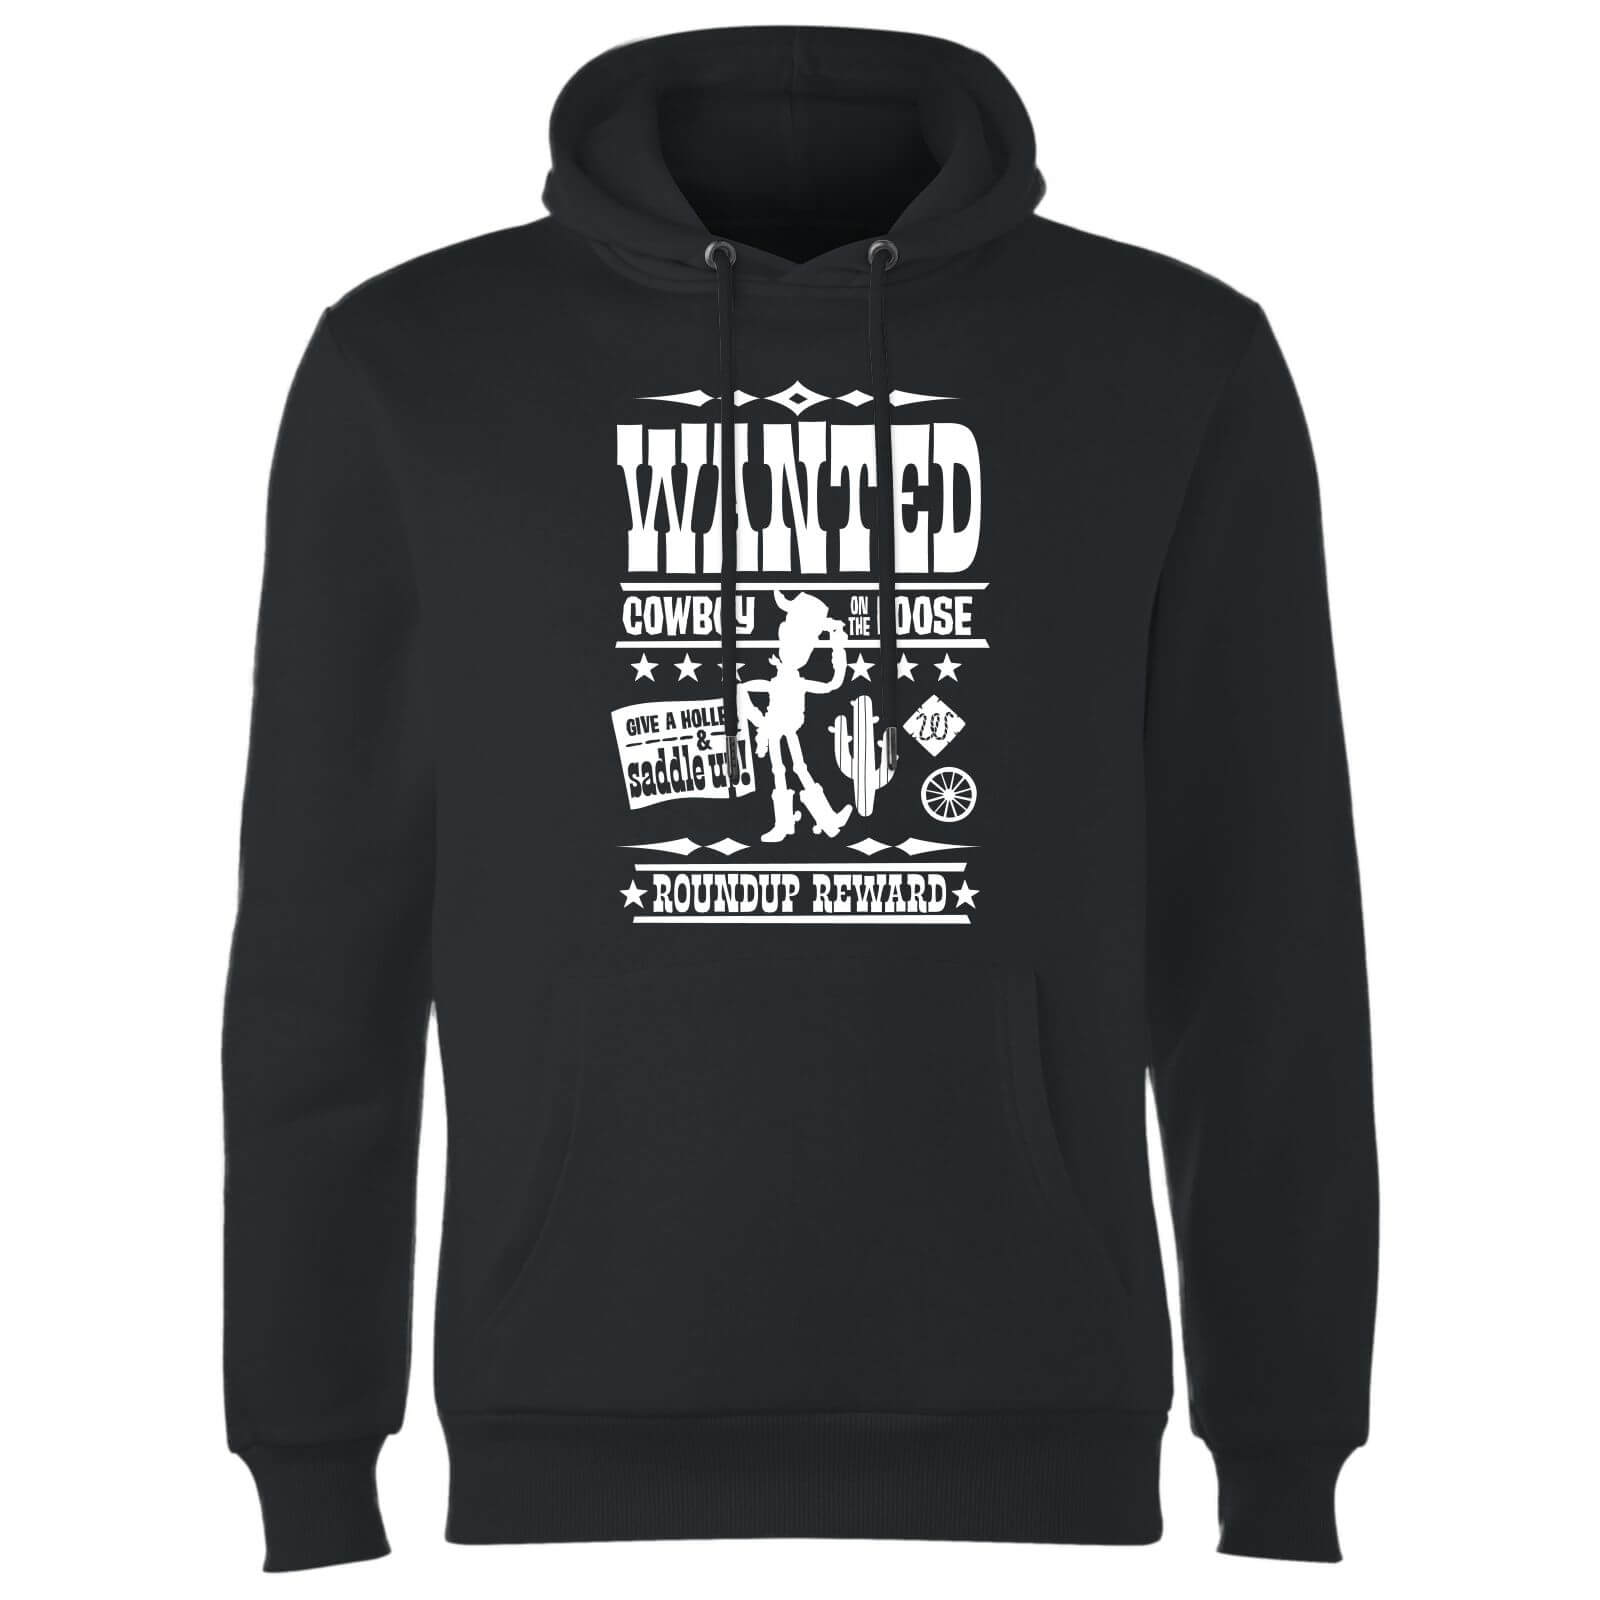 Toy Story Wanted Poster Hoodie - Black - S